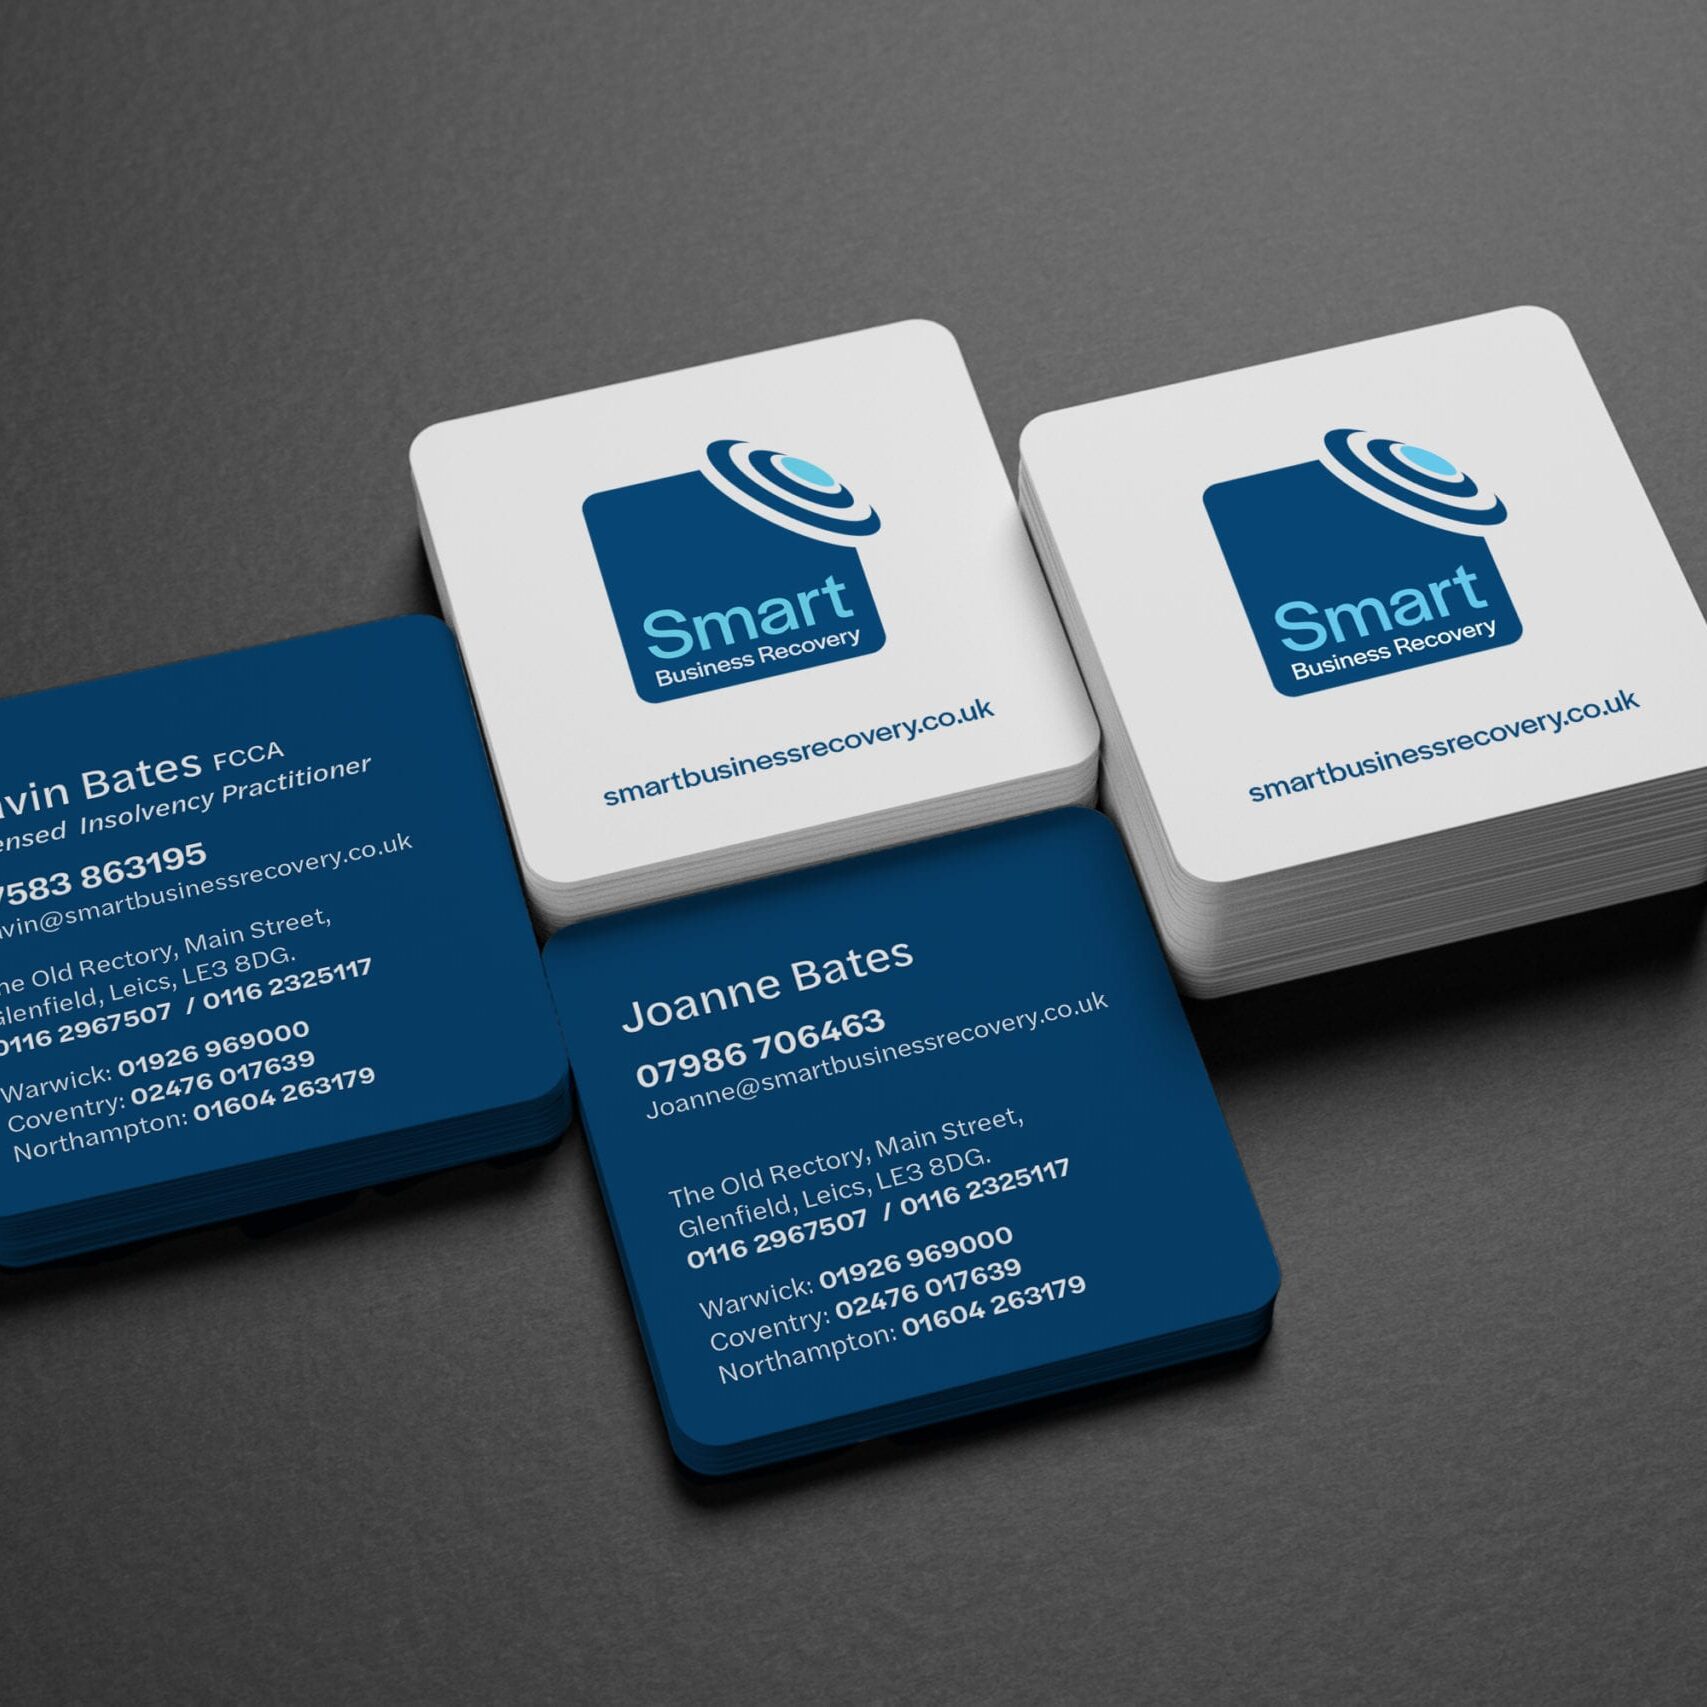 Square business cards design for Smart Business Recovery